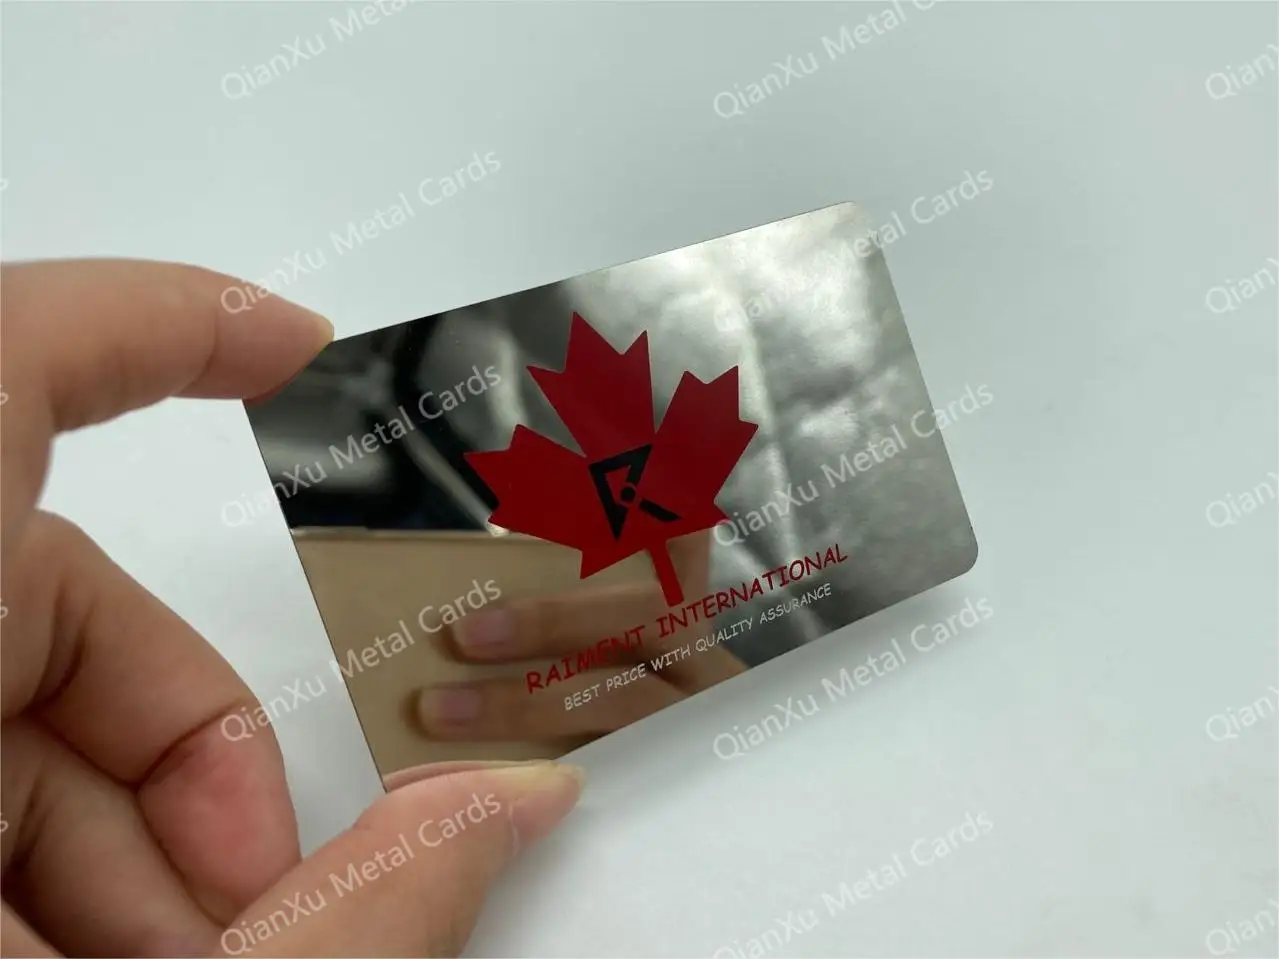 Stainless steel laser engraved metal business cards wholesale